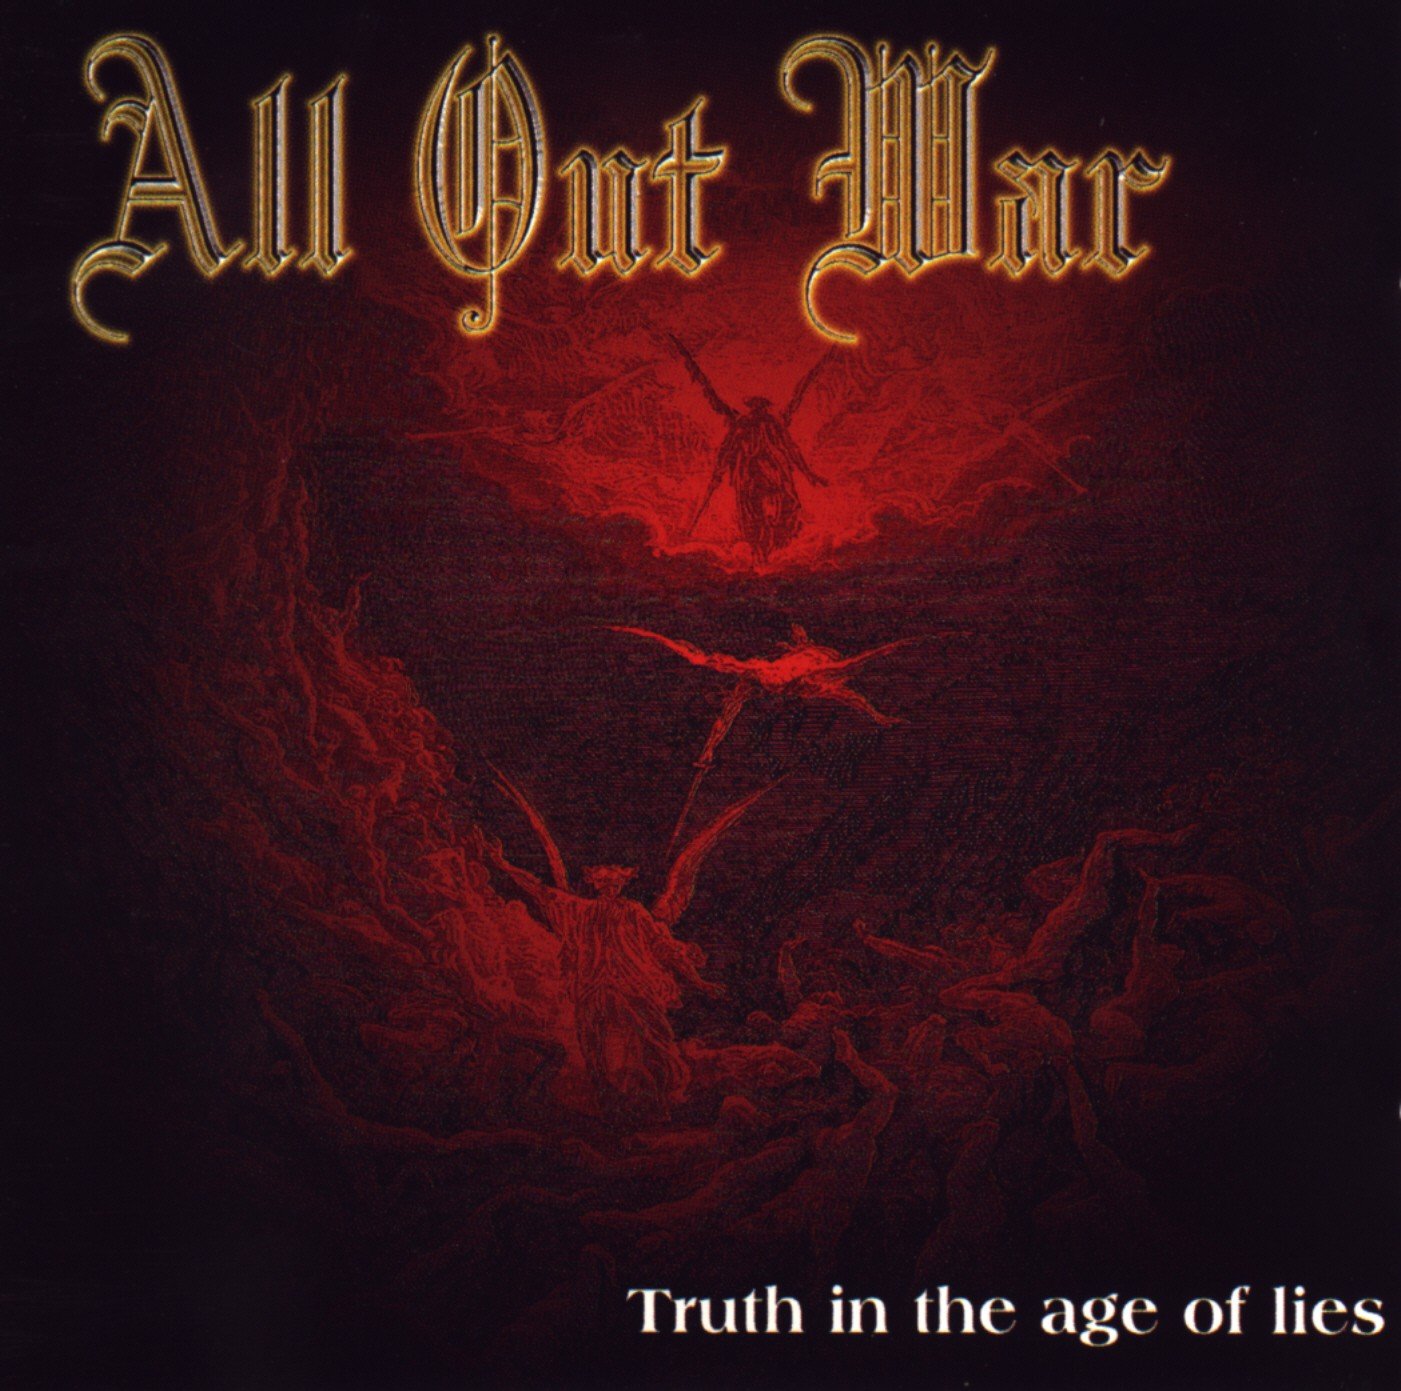 All Out War - Truth In The Age Of Lies (2012) FLAC Download